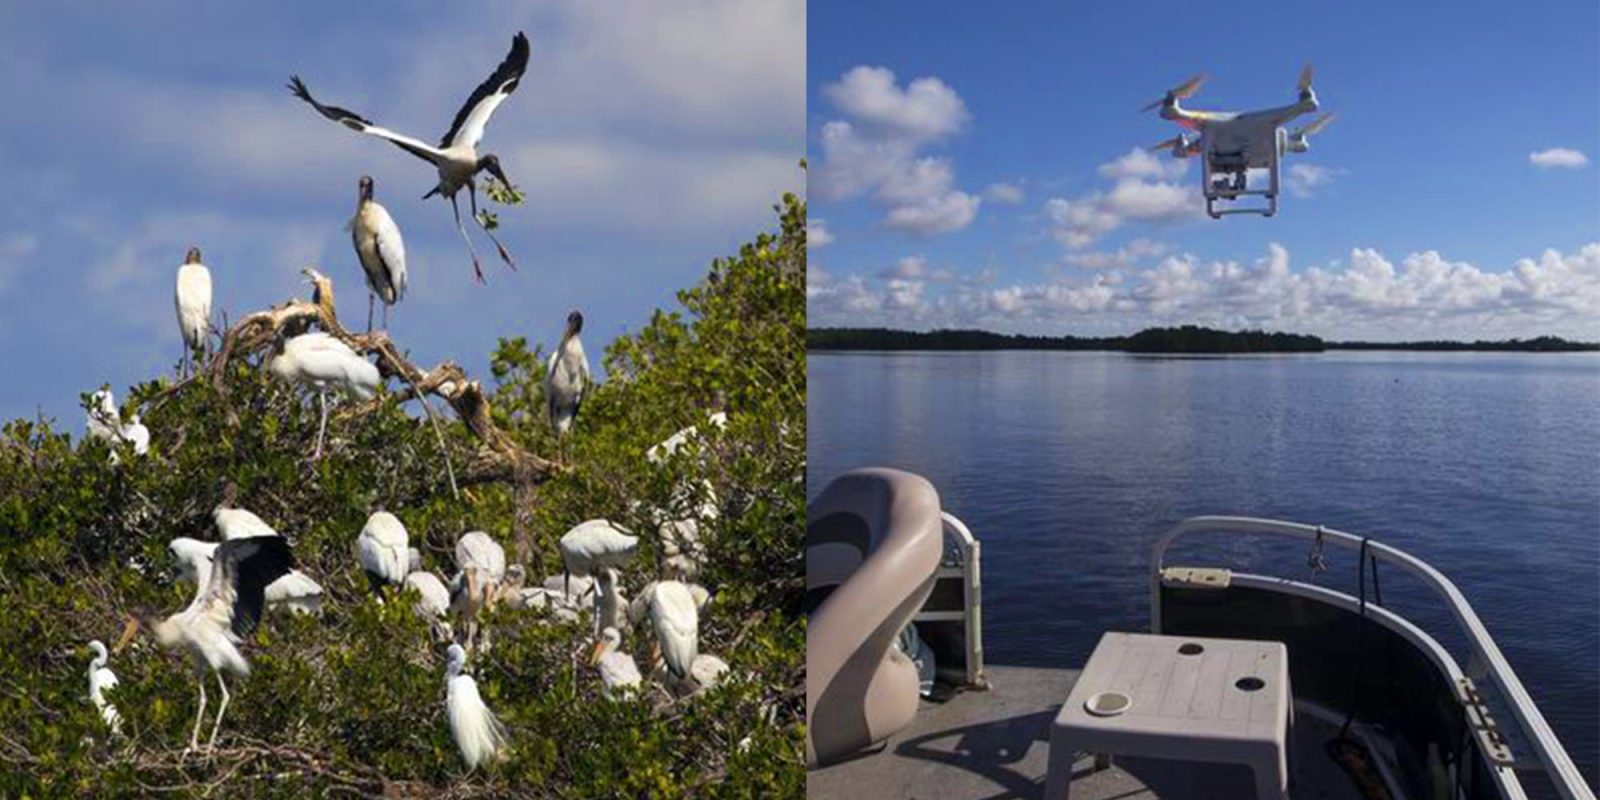 Drone used to study rookery on little Lenore Island, on the Caloosahatchee River in Florida.